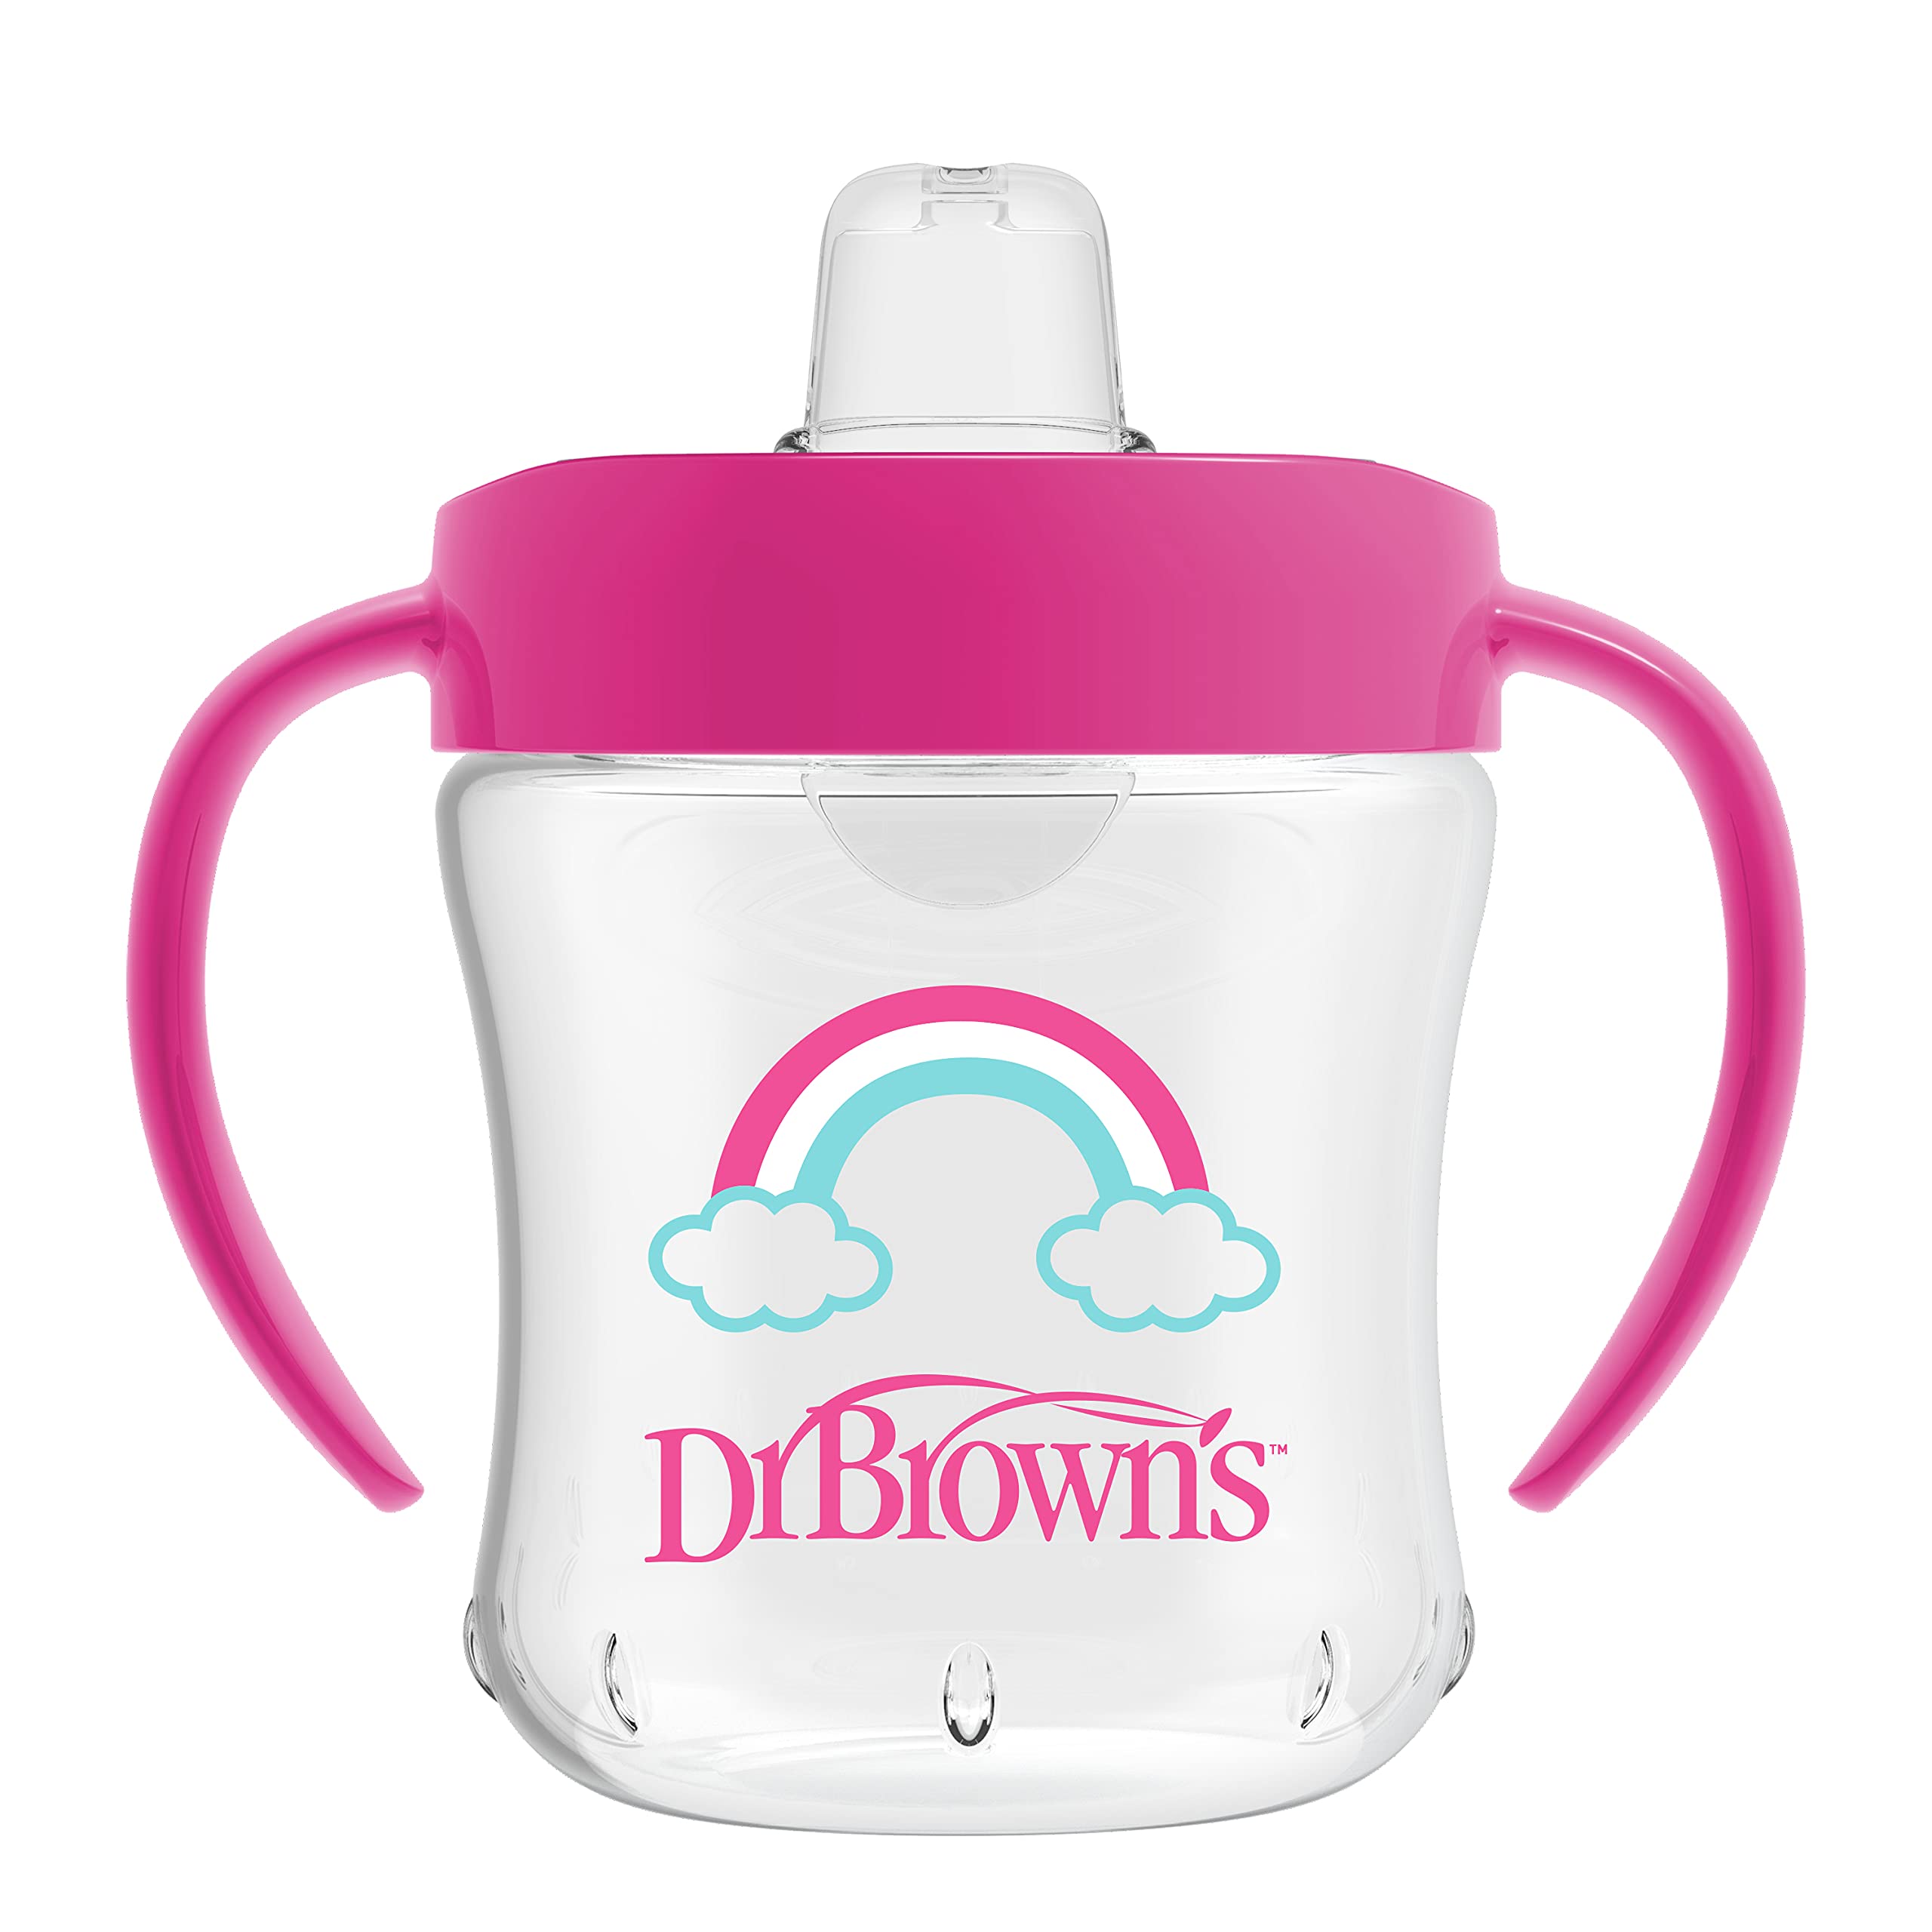 Dr. Brown’s Natural Flow® Anti-Colic Options+™ Special Edition Pink Baby Bottle Gift Set with Soft Sippy Spout Transition Cup, Flexees™ Teether, Bottle Cleaning Brush and Travel Caps